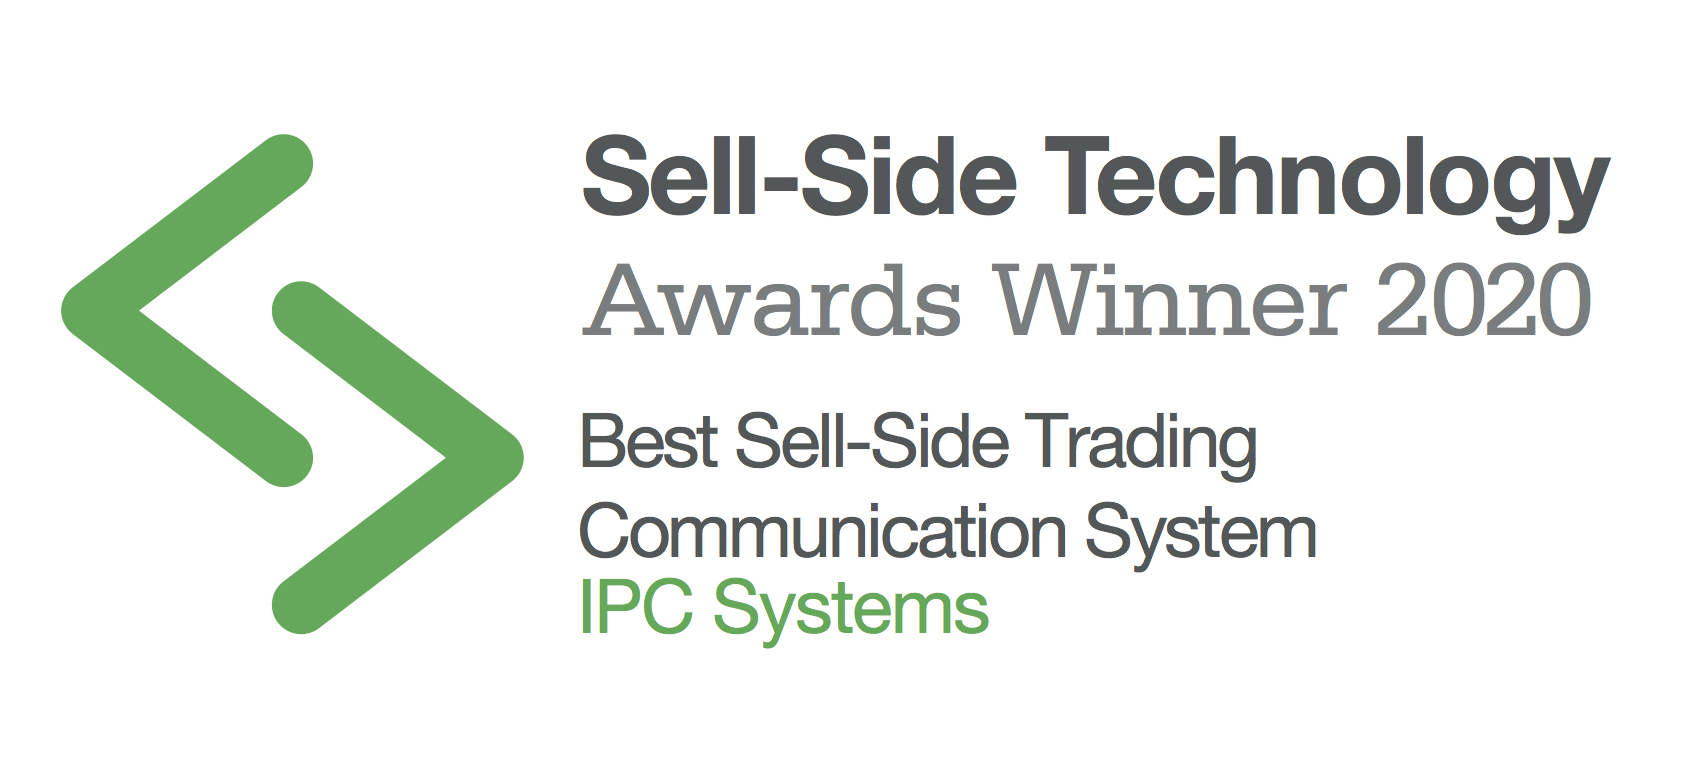 “Best Sell-Side Trading Communication System” – Waters Sell-Side Technology Awards 2020